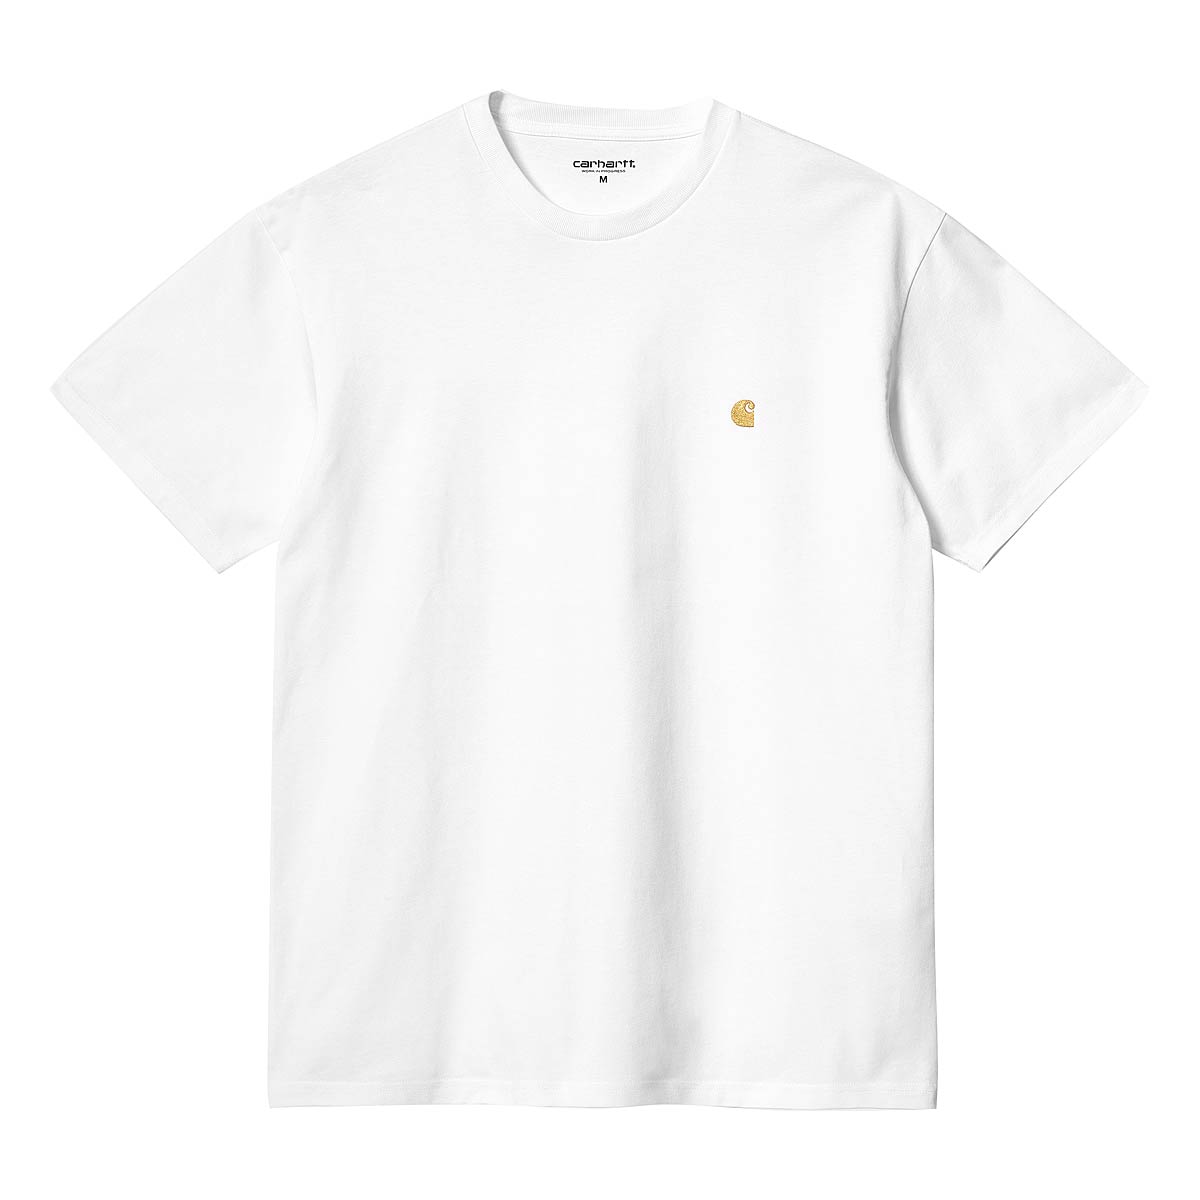 Carhartt Wip S/s Chase T-shirt, Weiß/gold M